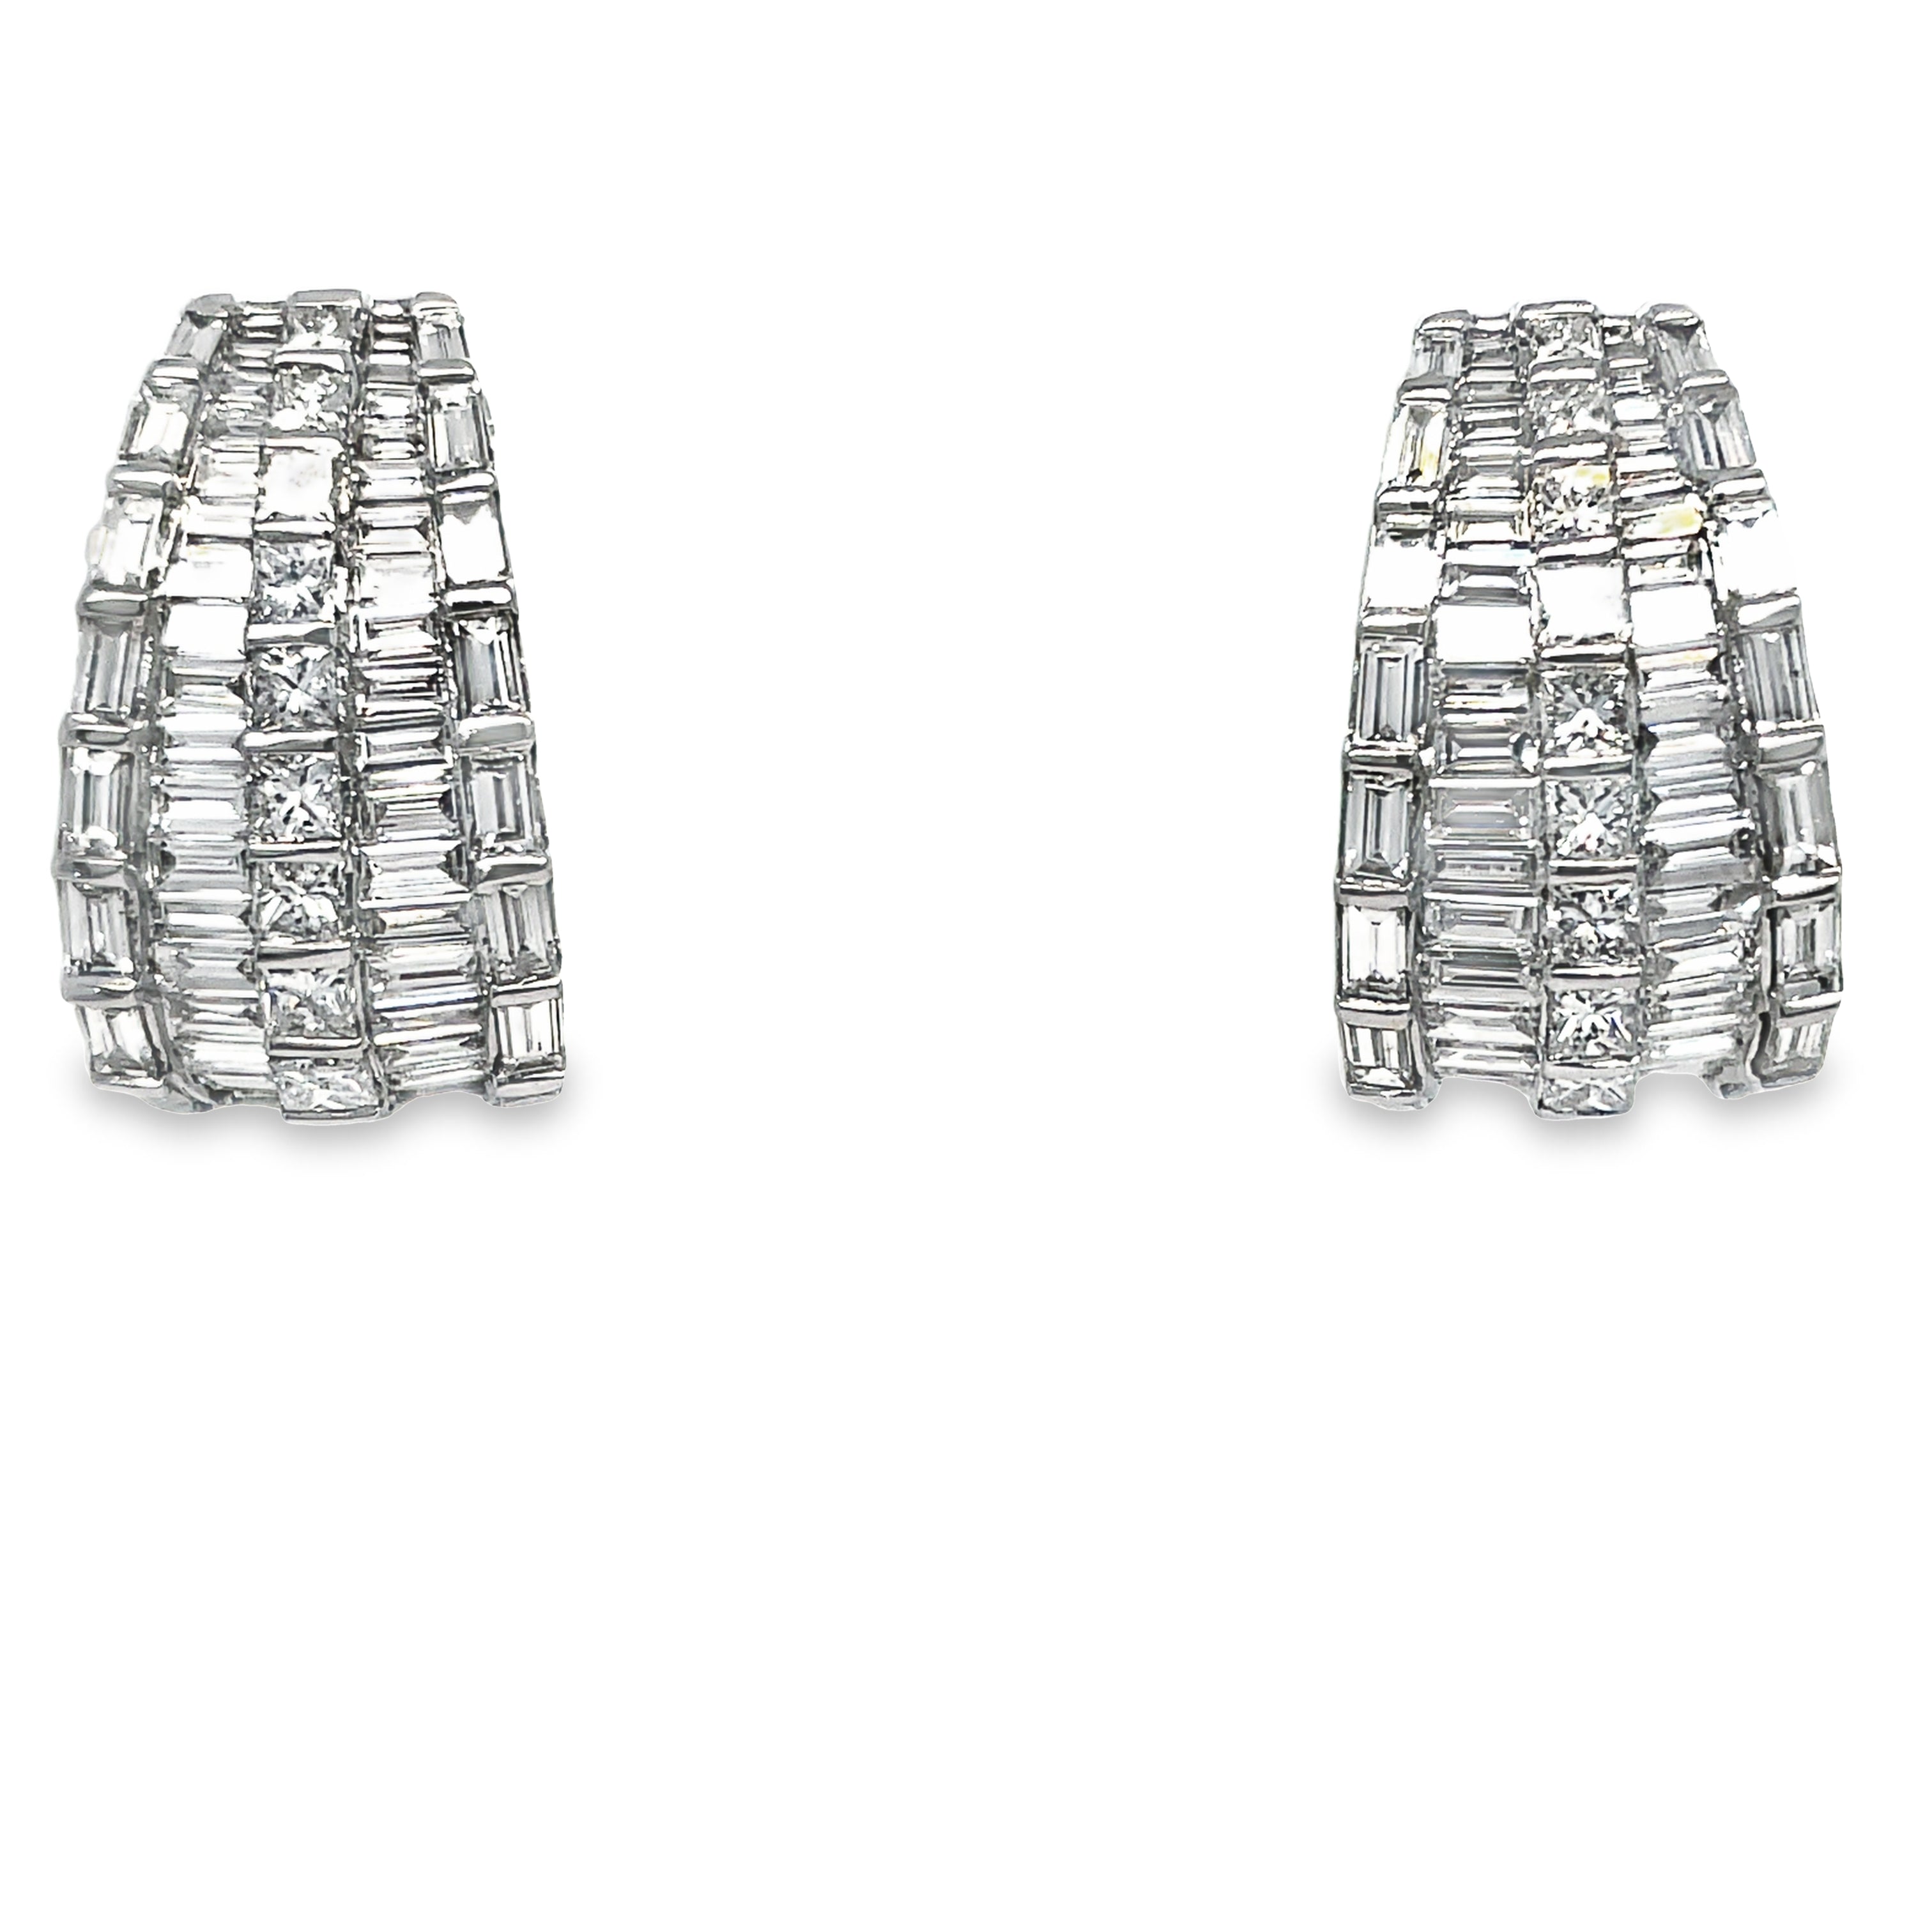 Expertly crafted in 18k white gold, these stunning drop earrings feature a mix of baguette and round diamonds totaling 6.47 cts. With a secure omega clip system, these high-quality diamonds will add elegance and sparkle to any outfit.